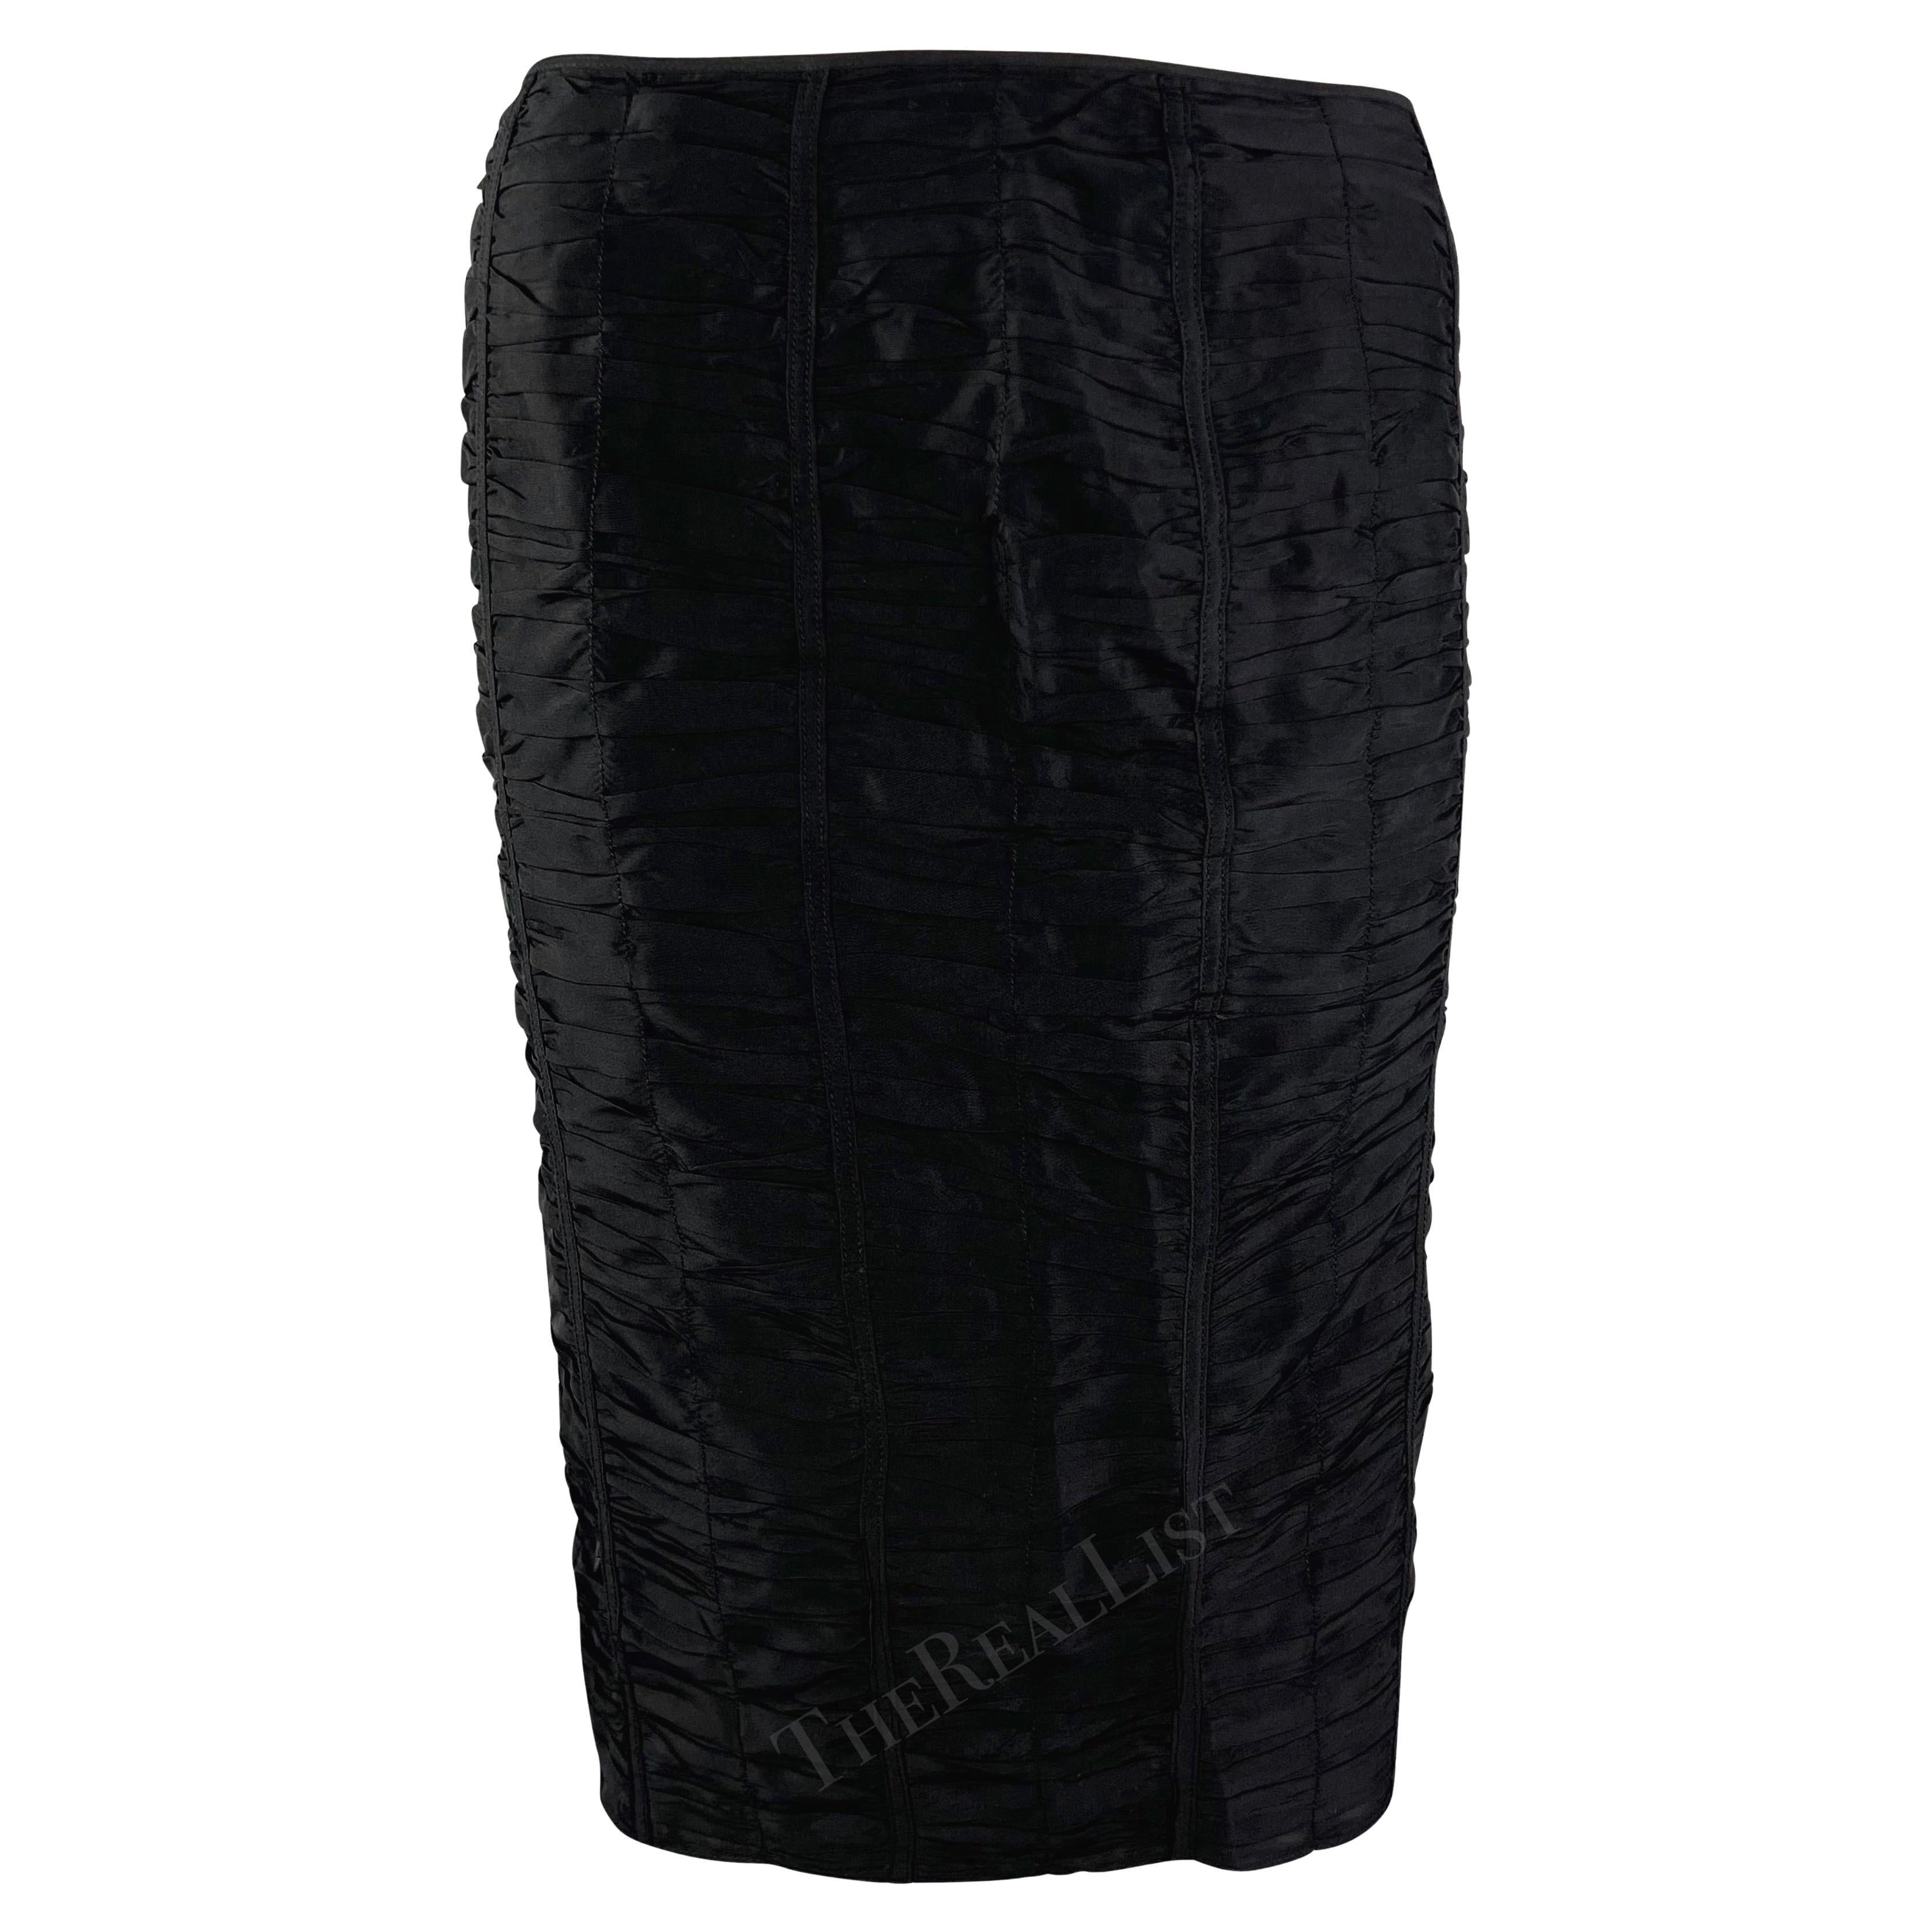 S/S 2001 Gucci by Tom Ford Black Ruched Silk Skirt For Sale